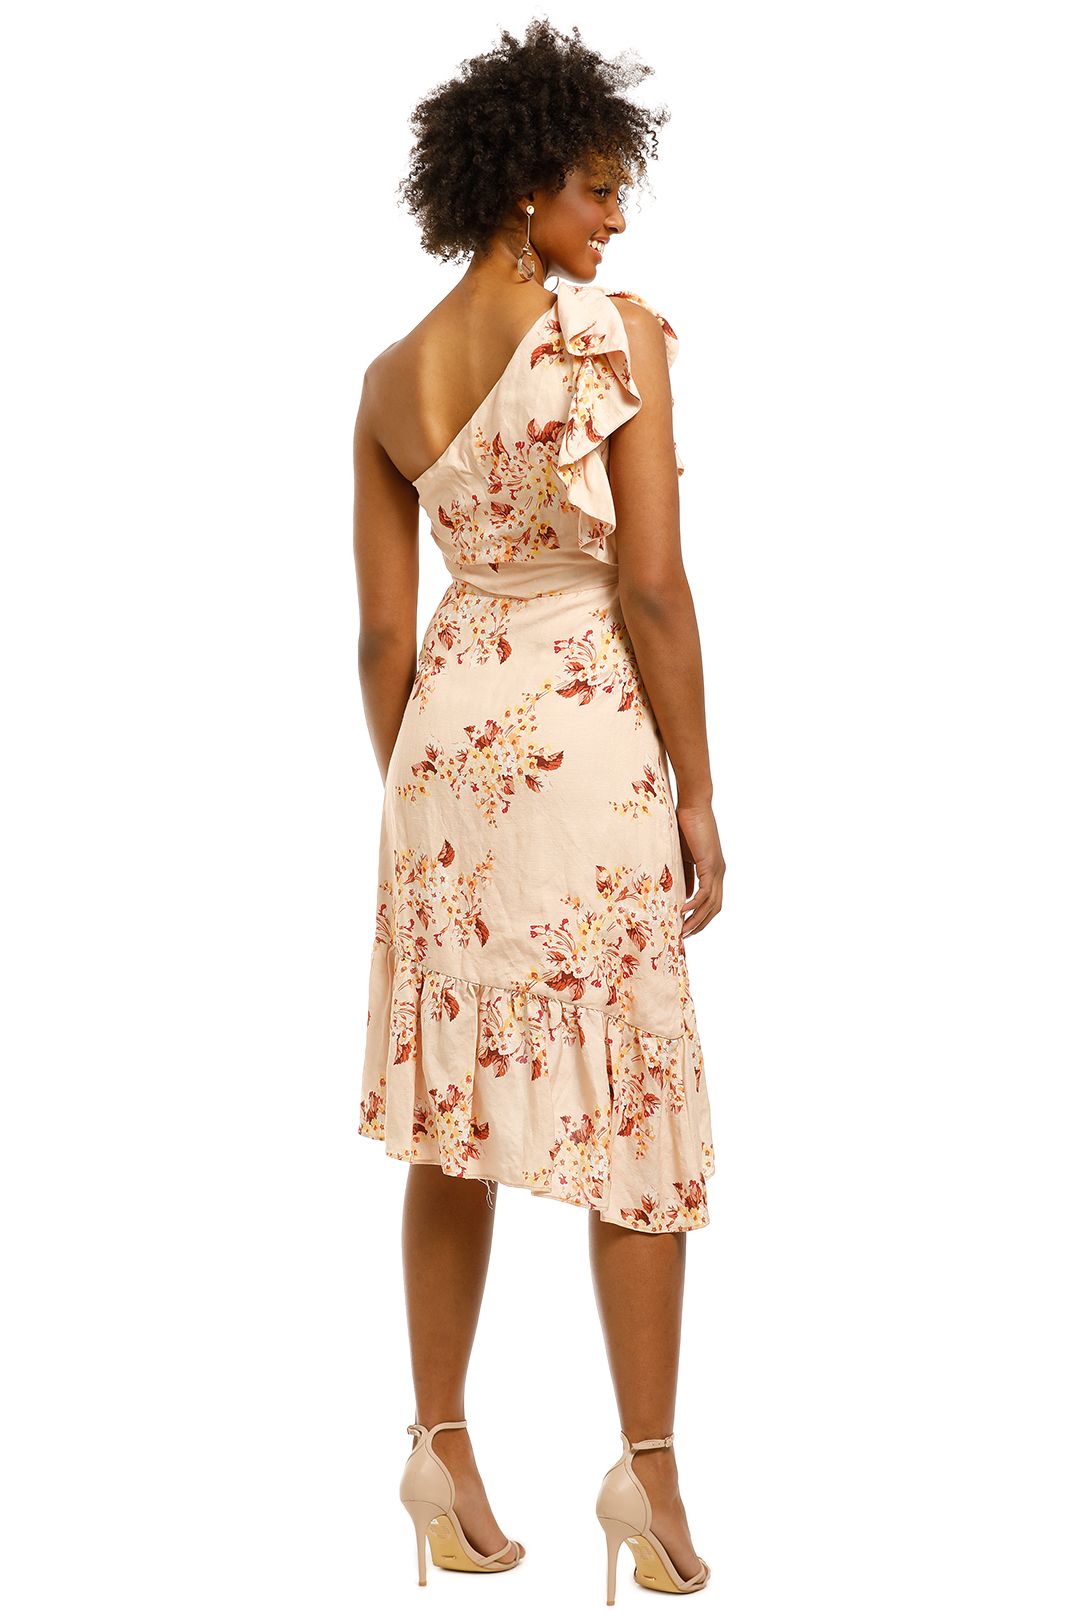 Ministry-of-Style-Inner-Bloom-Asymmetrical-Dress-Floral-Print-Back